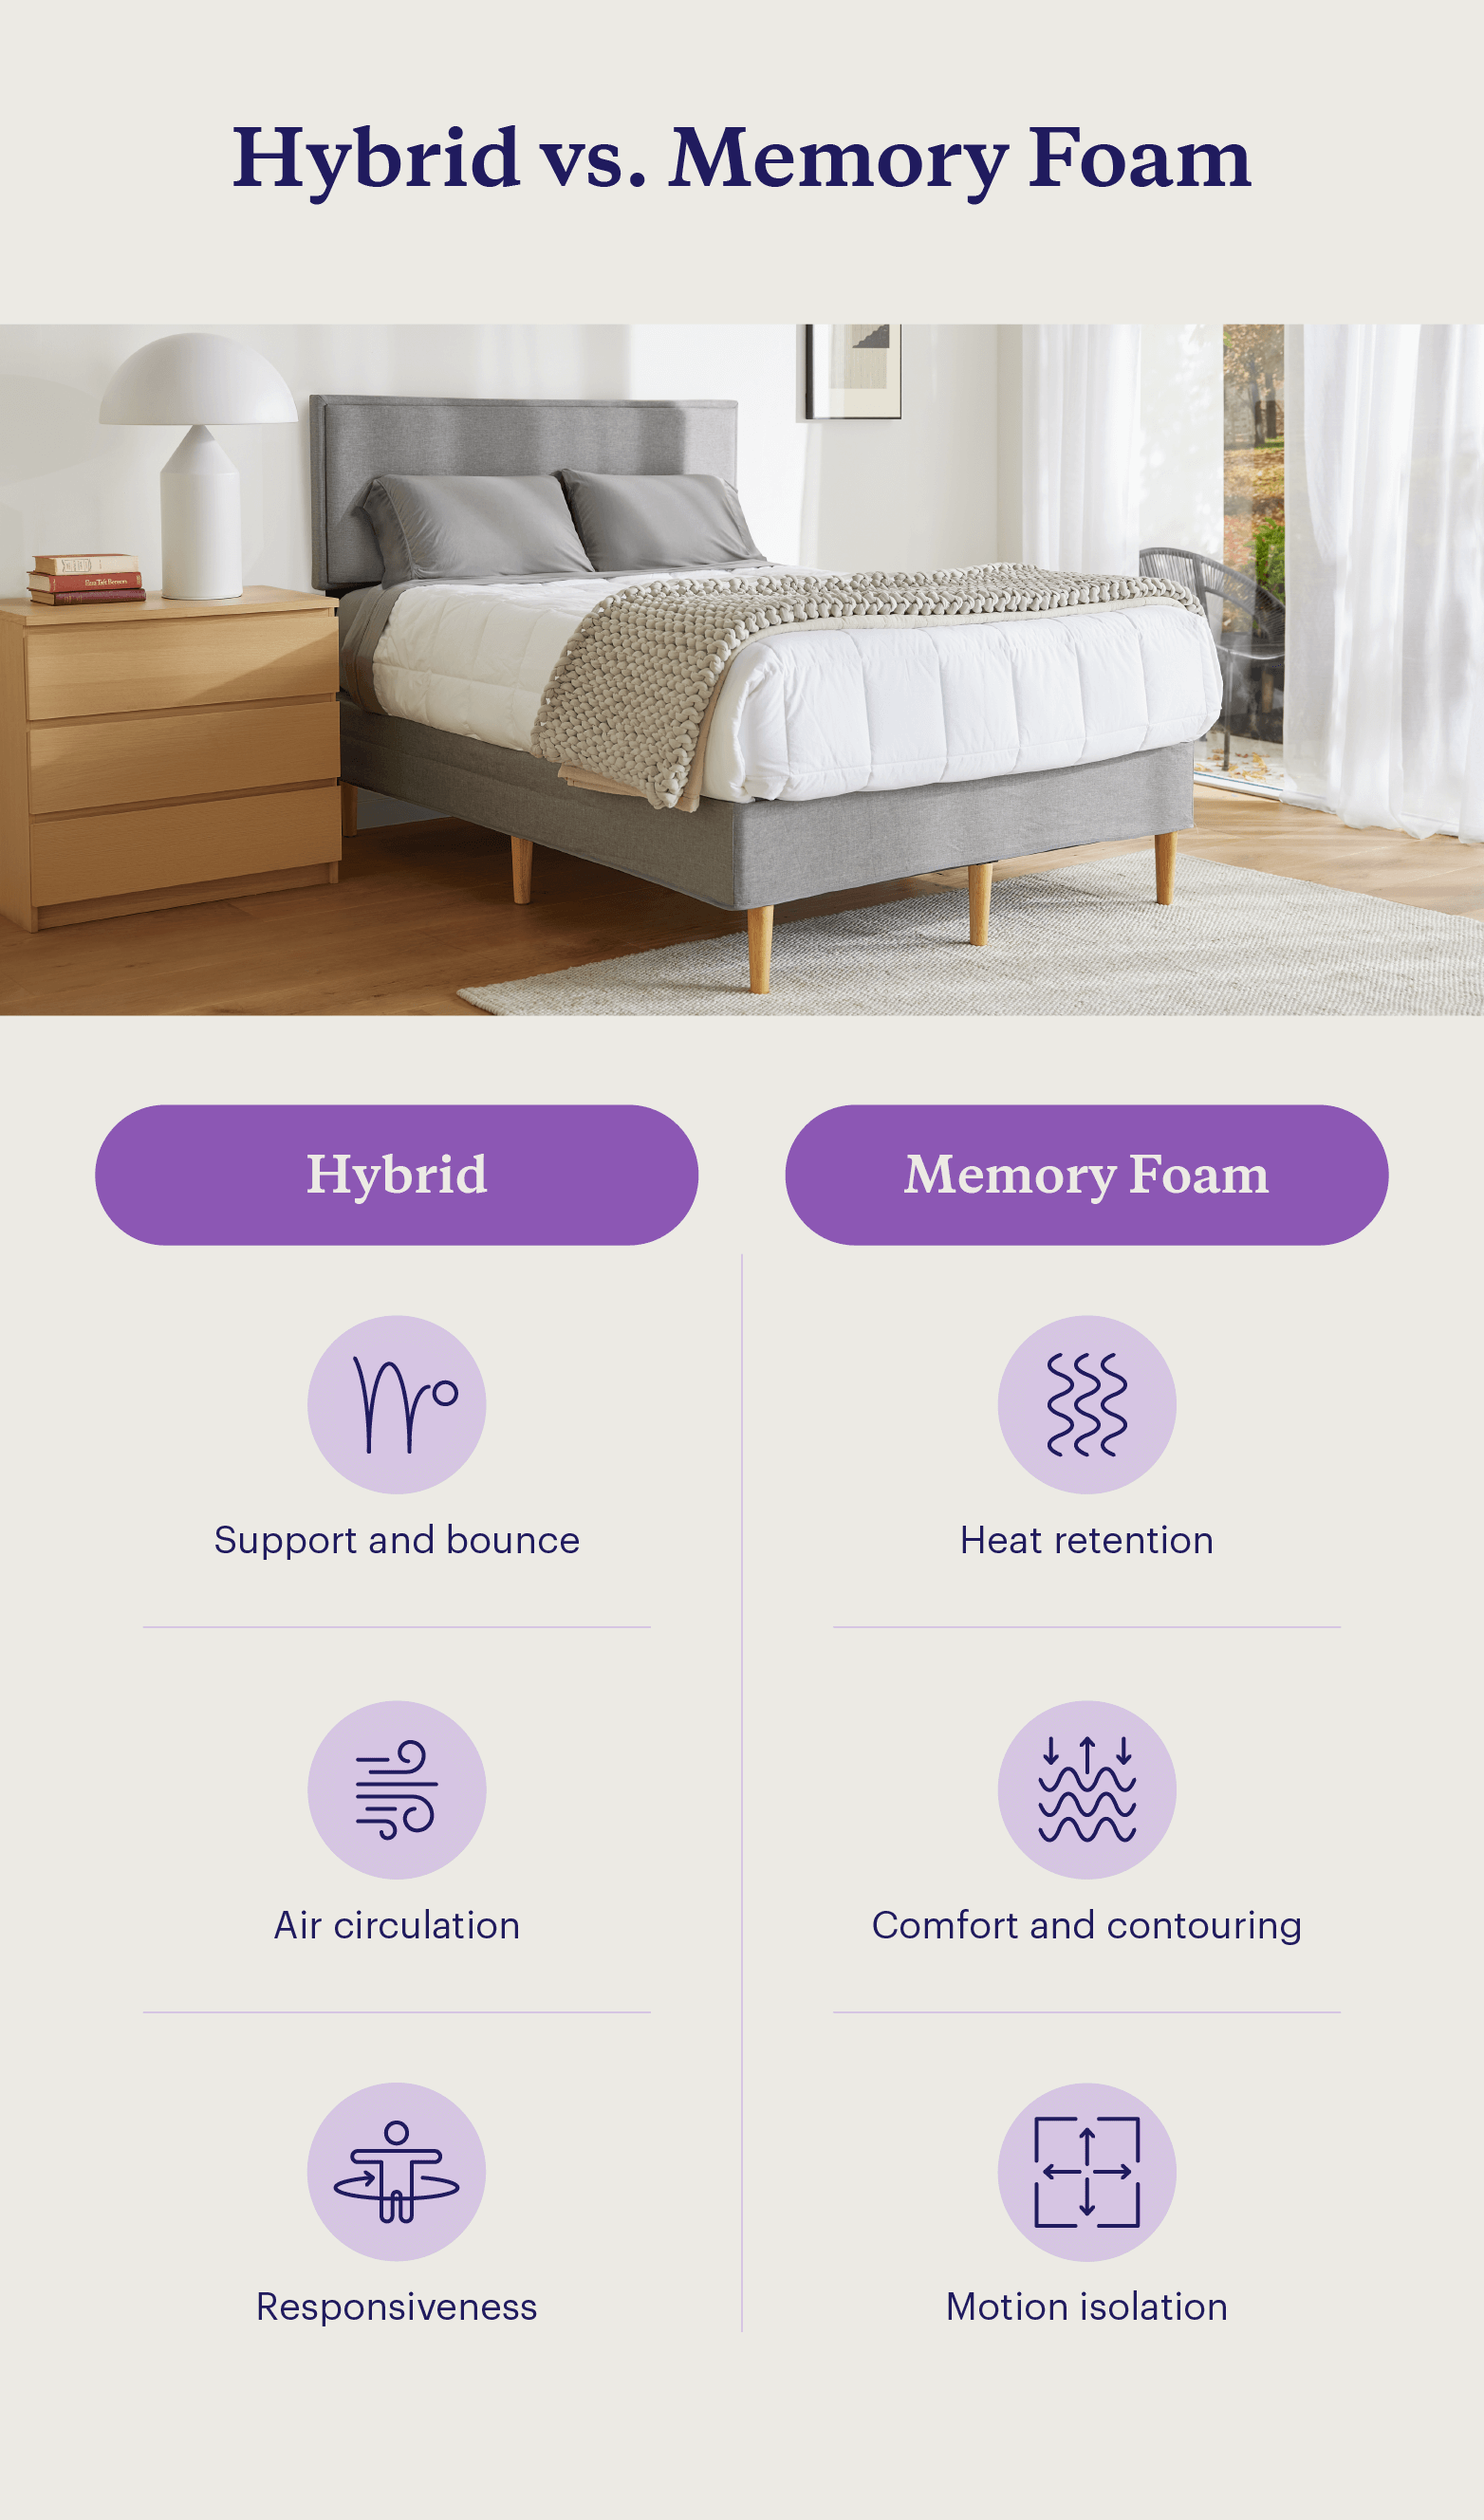 Graphic explaining the differences between a hybrid mattress and a memory foam mattress.